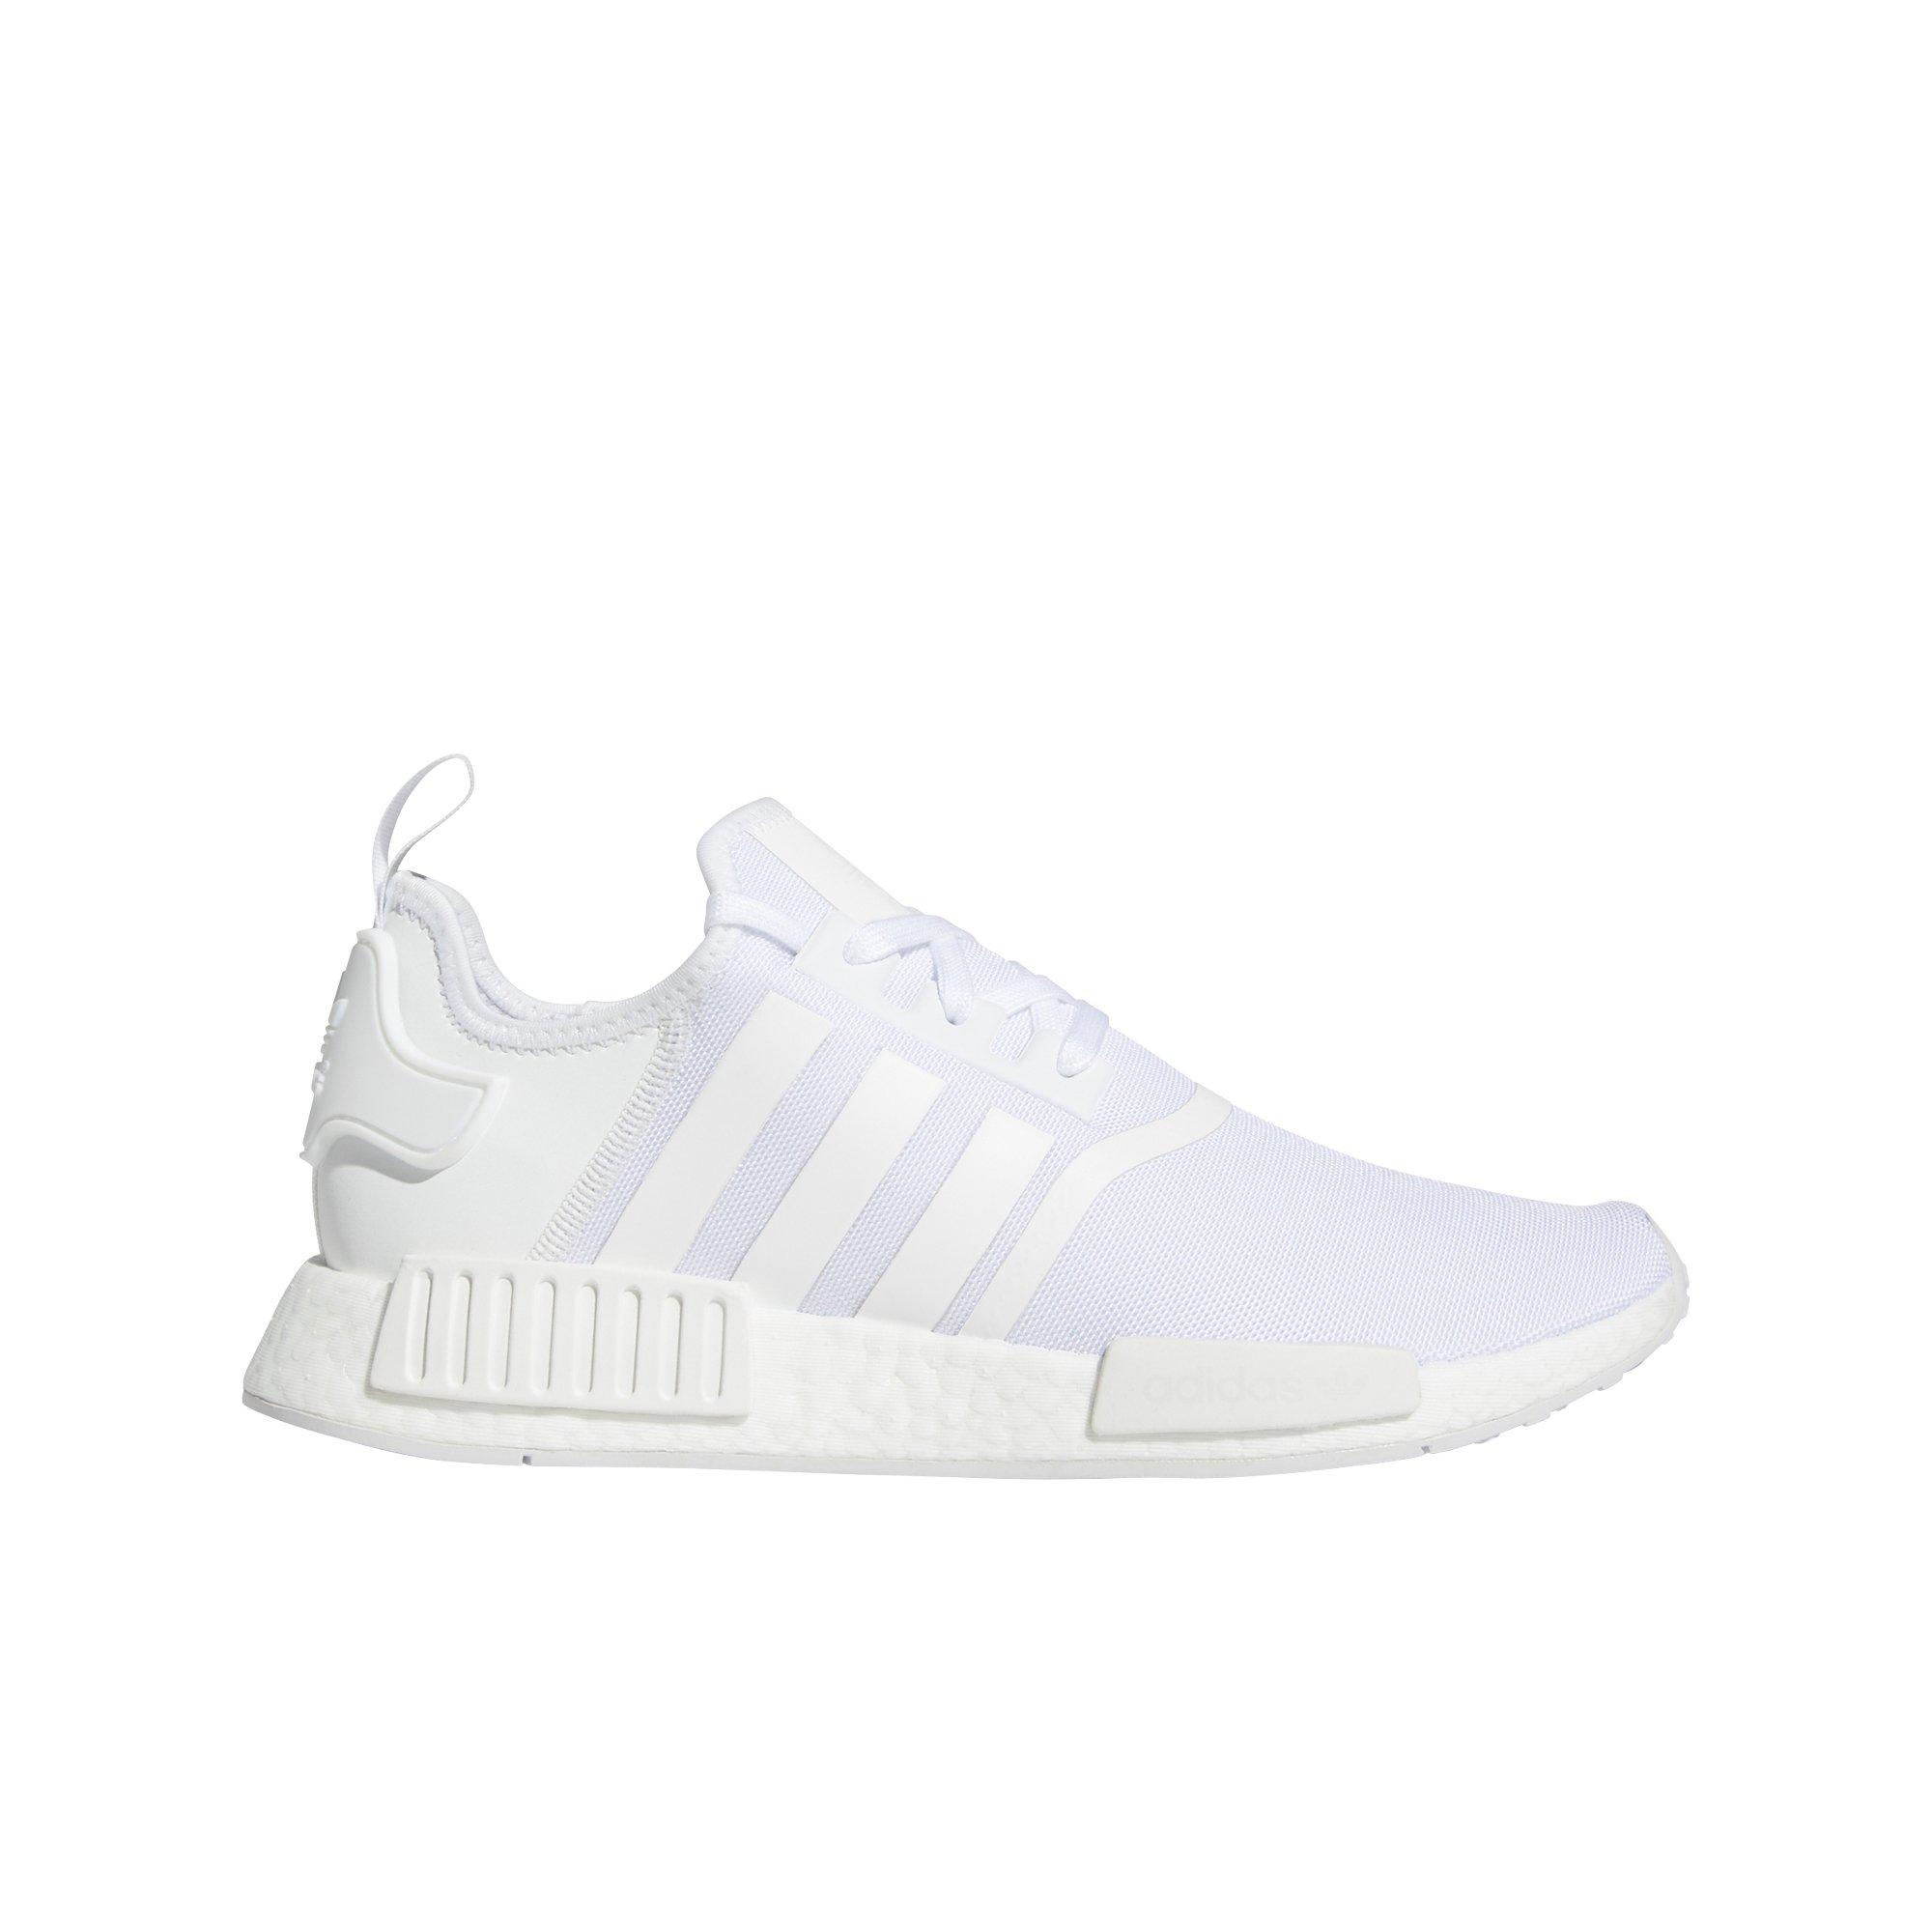 sneakers adidas nmd r1